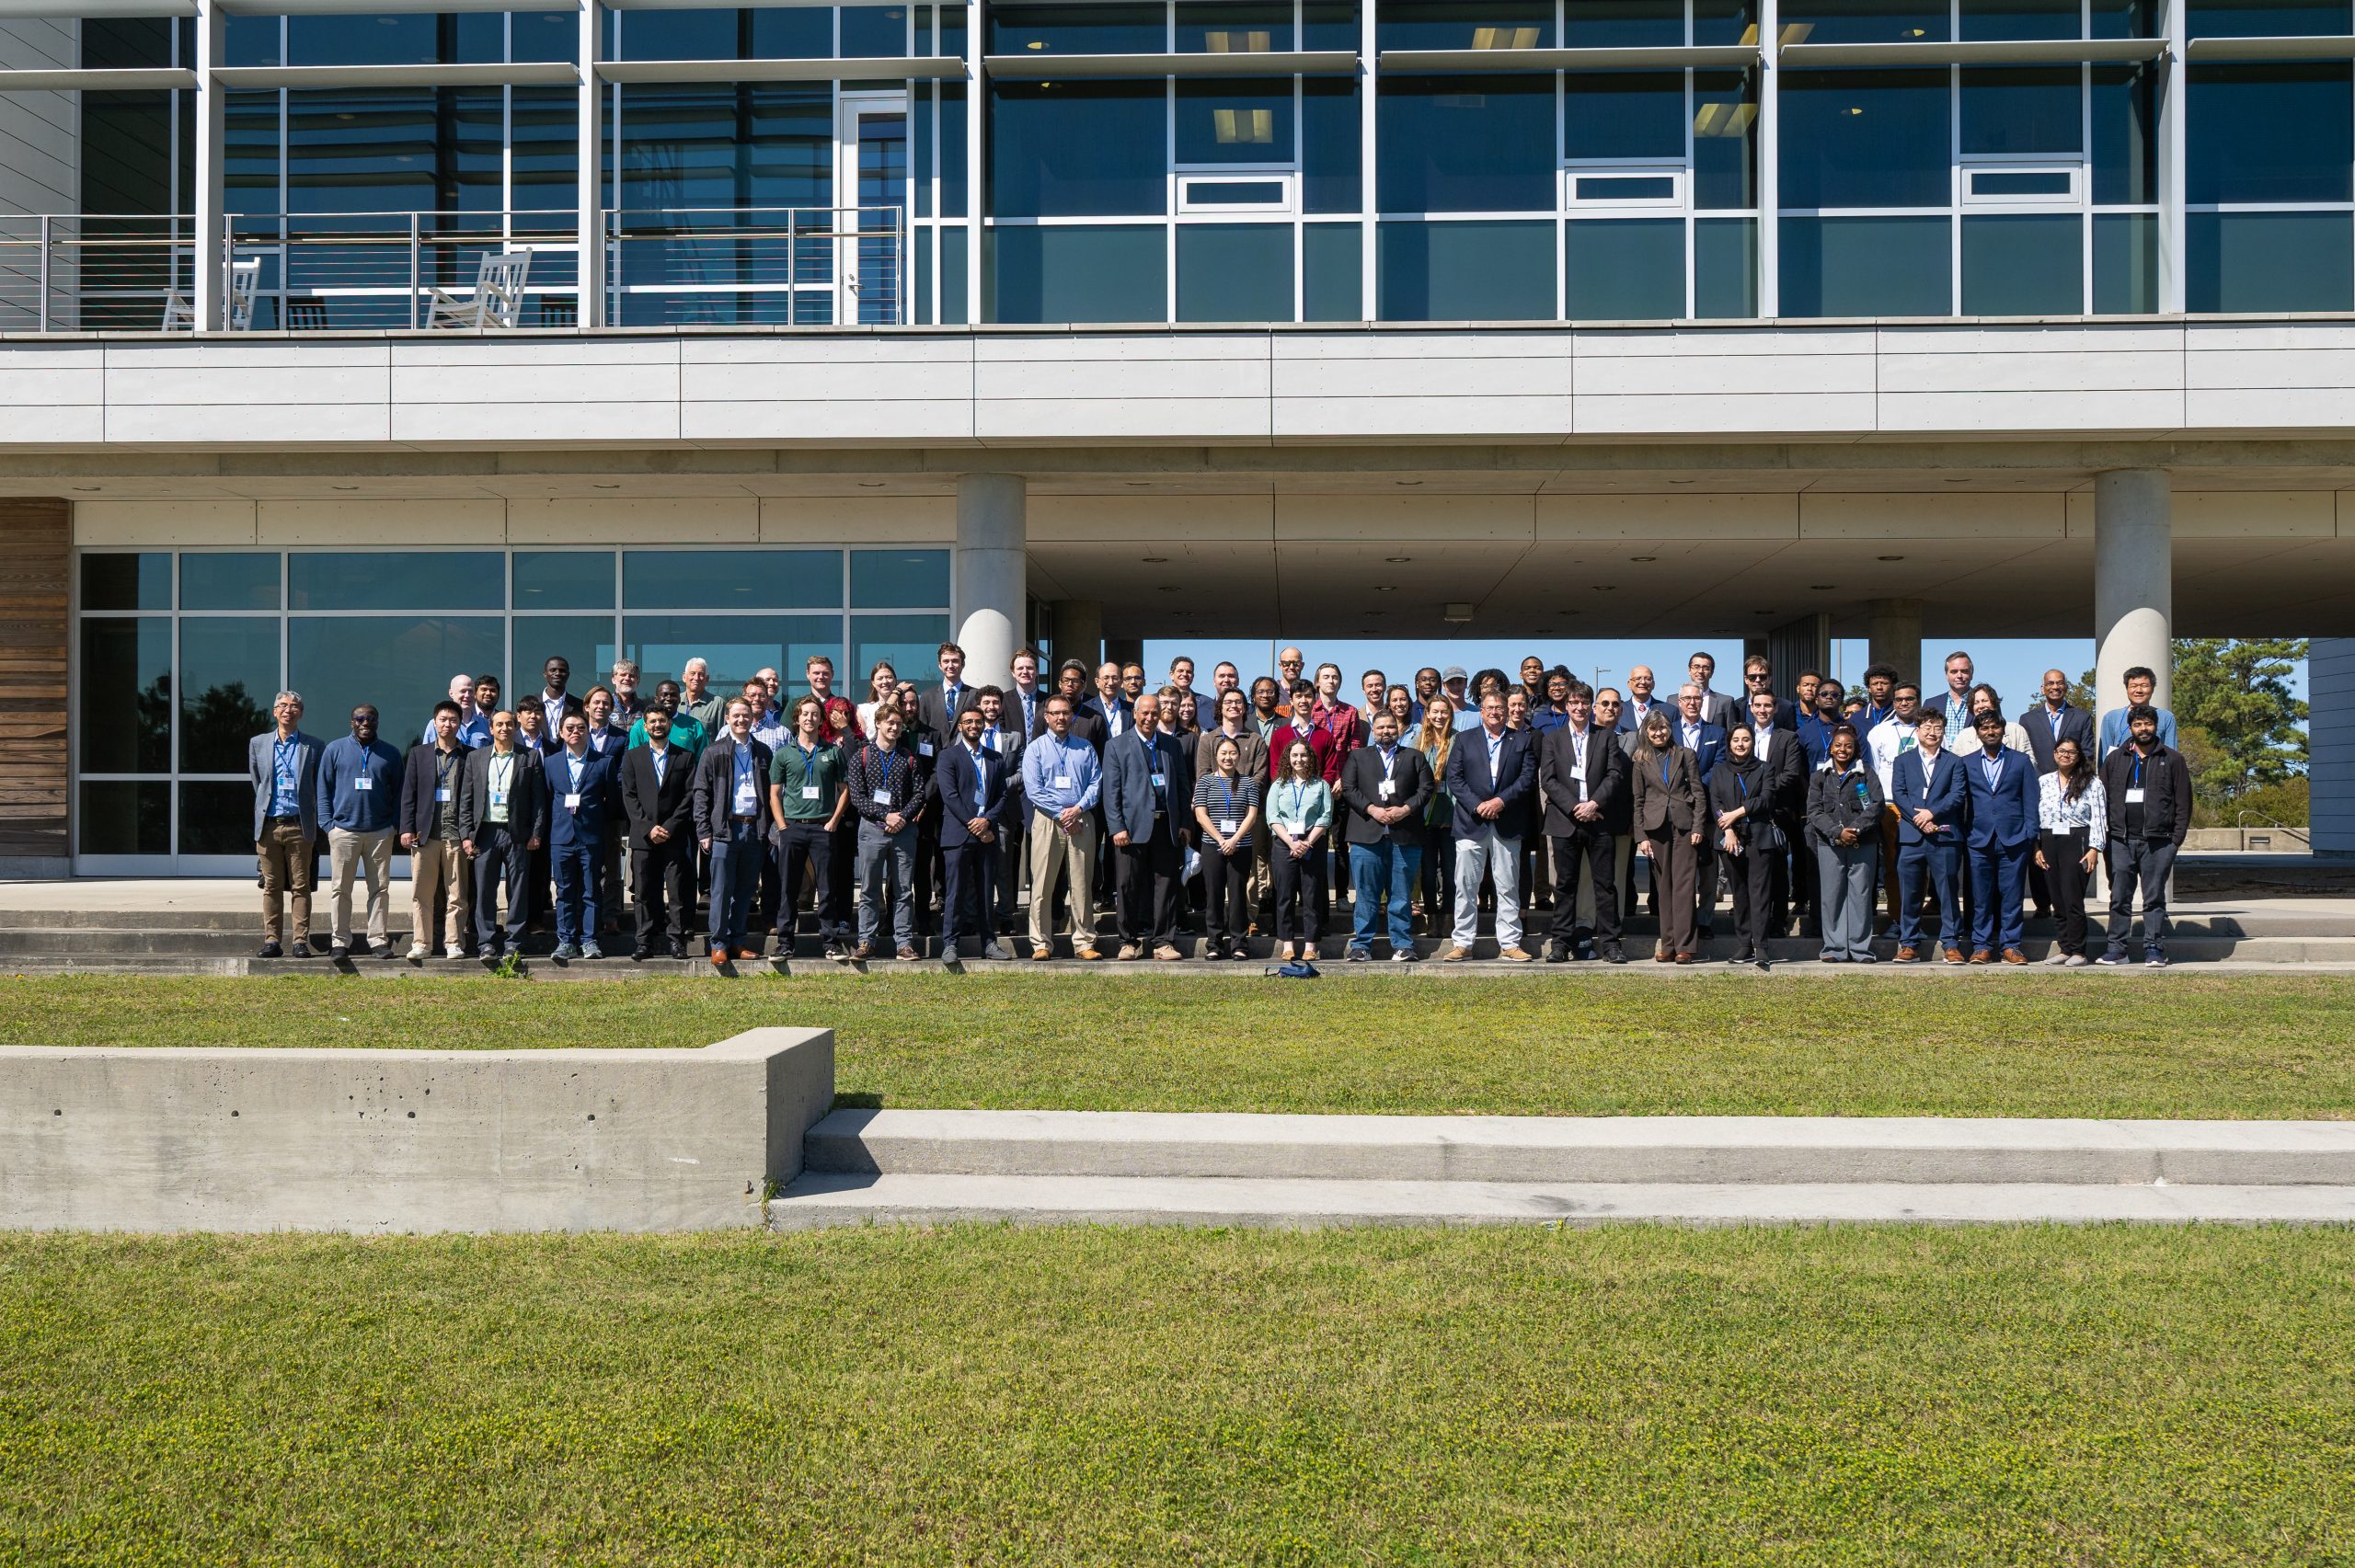 Group photo of NCROEP attendees